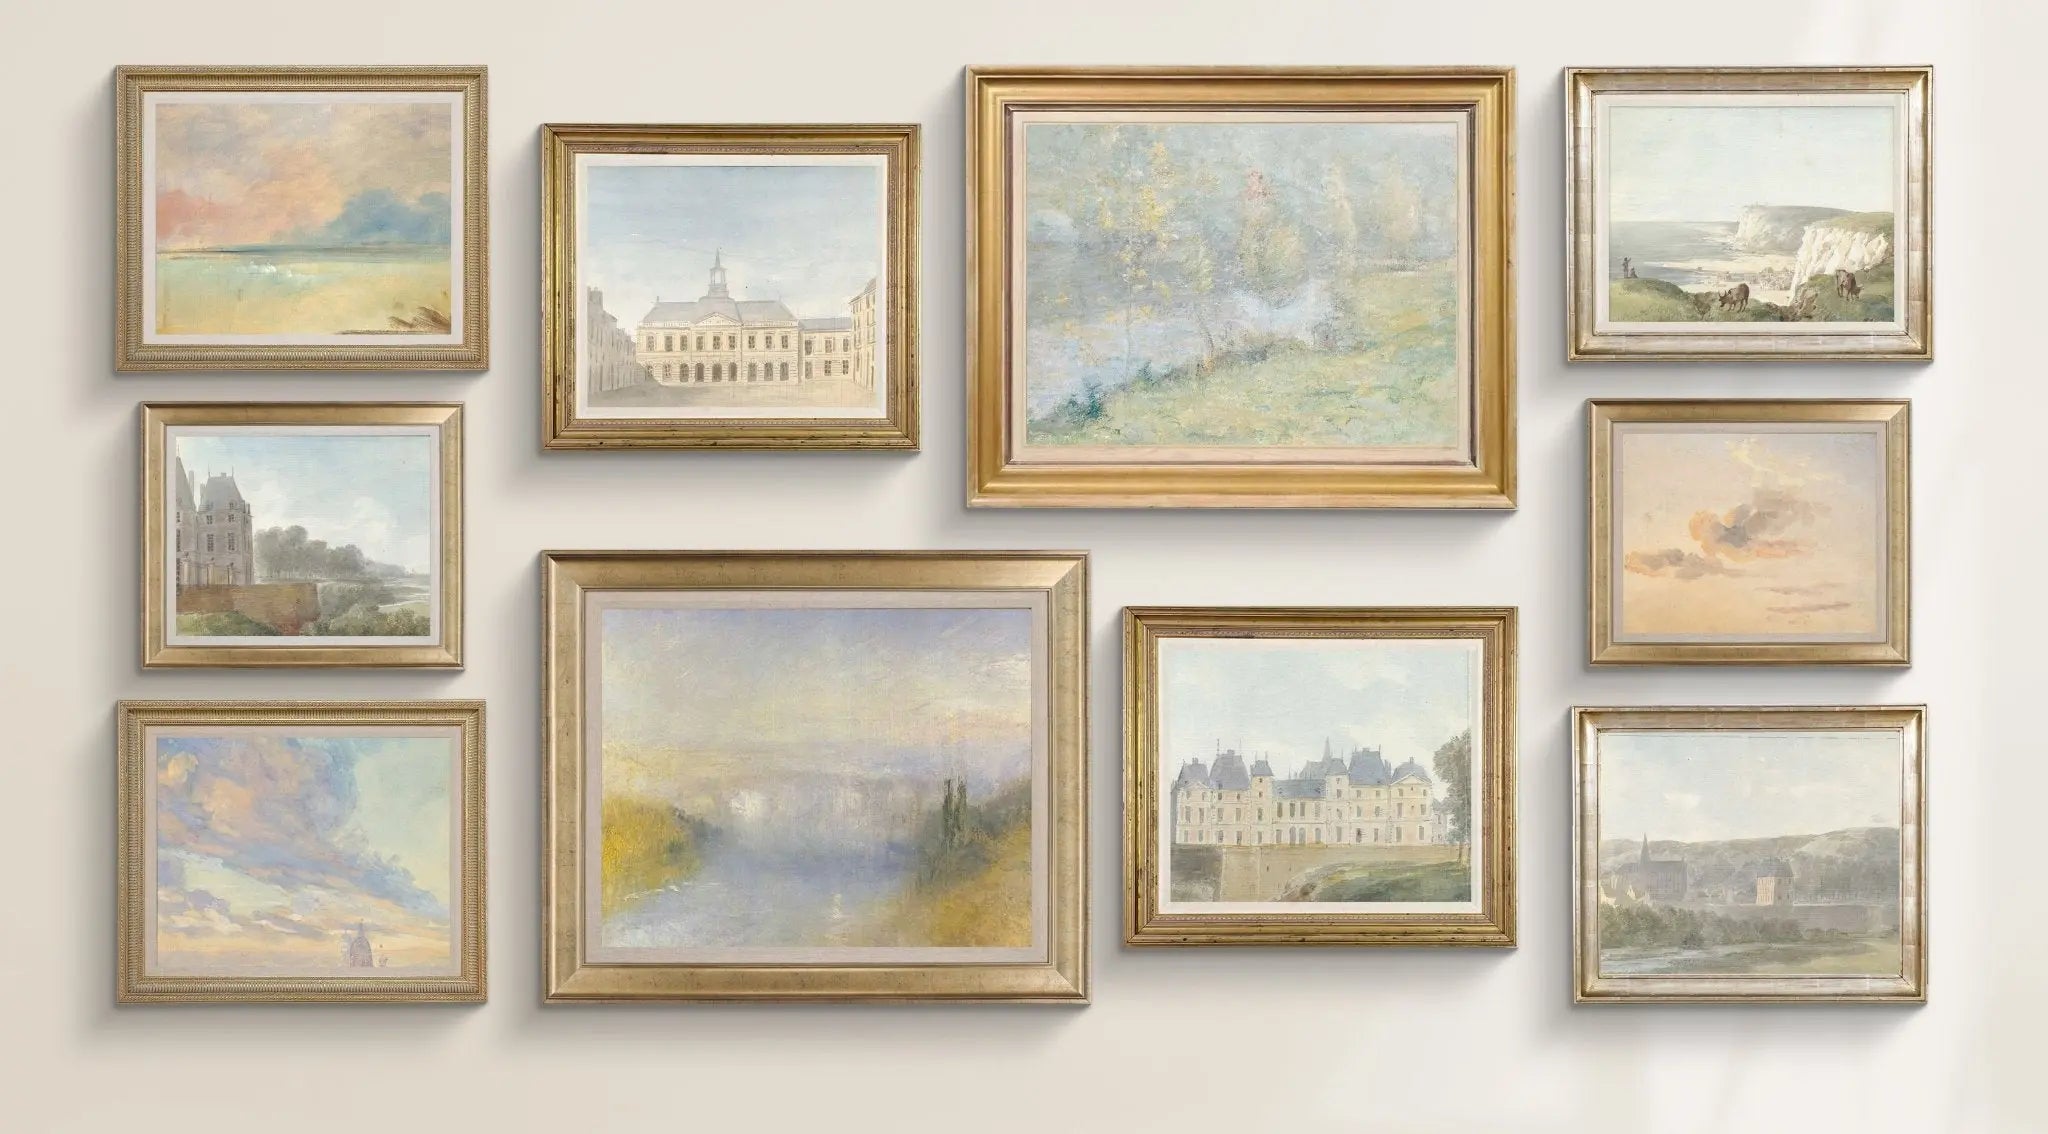 Gallery Series: French Country - Emblem Atelier